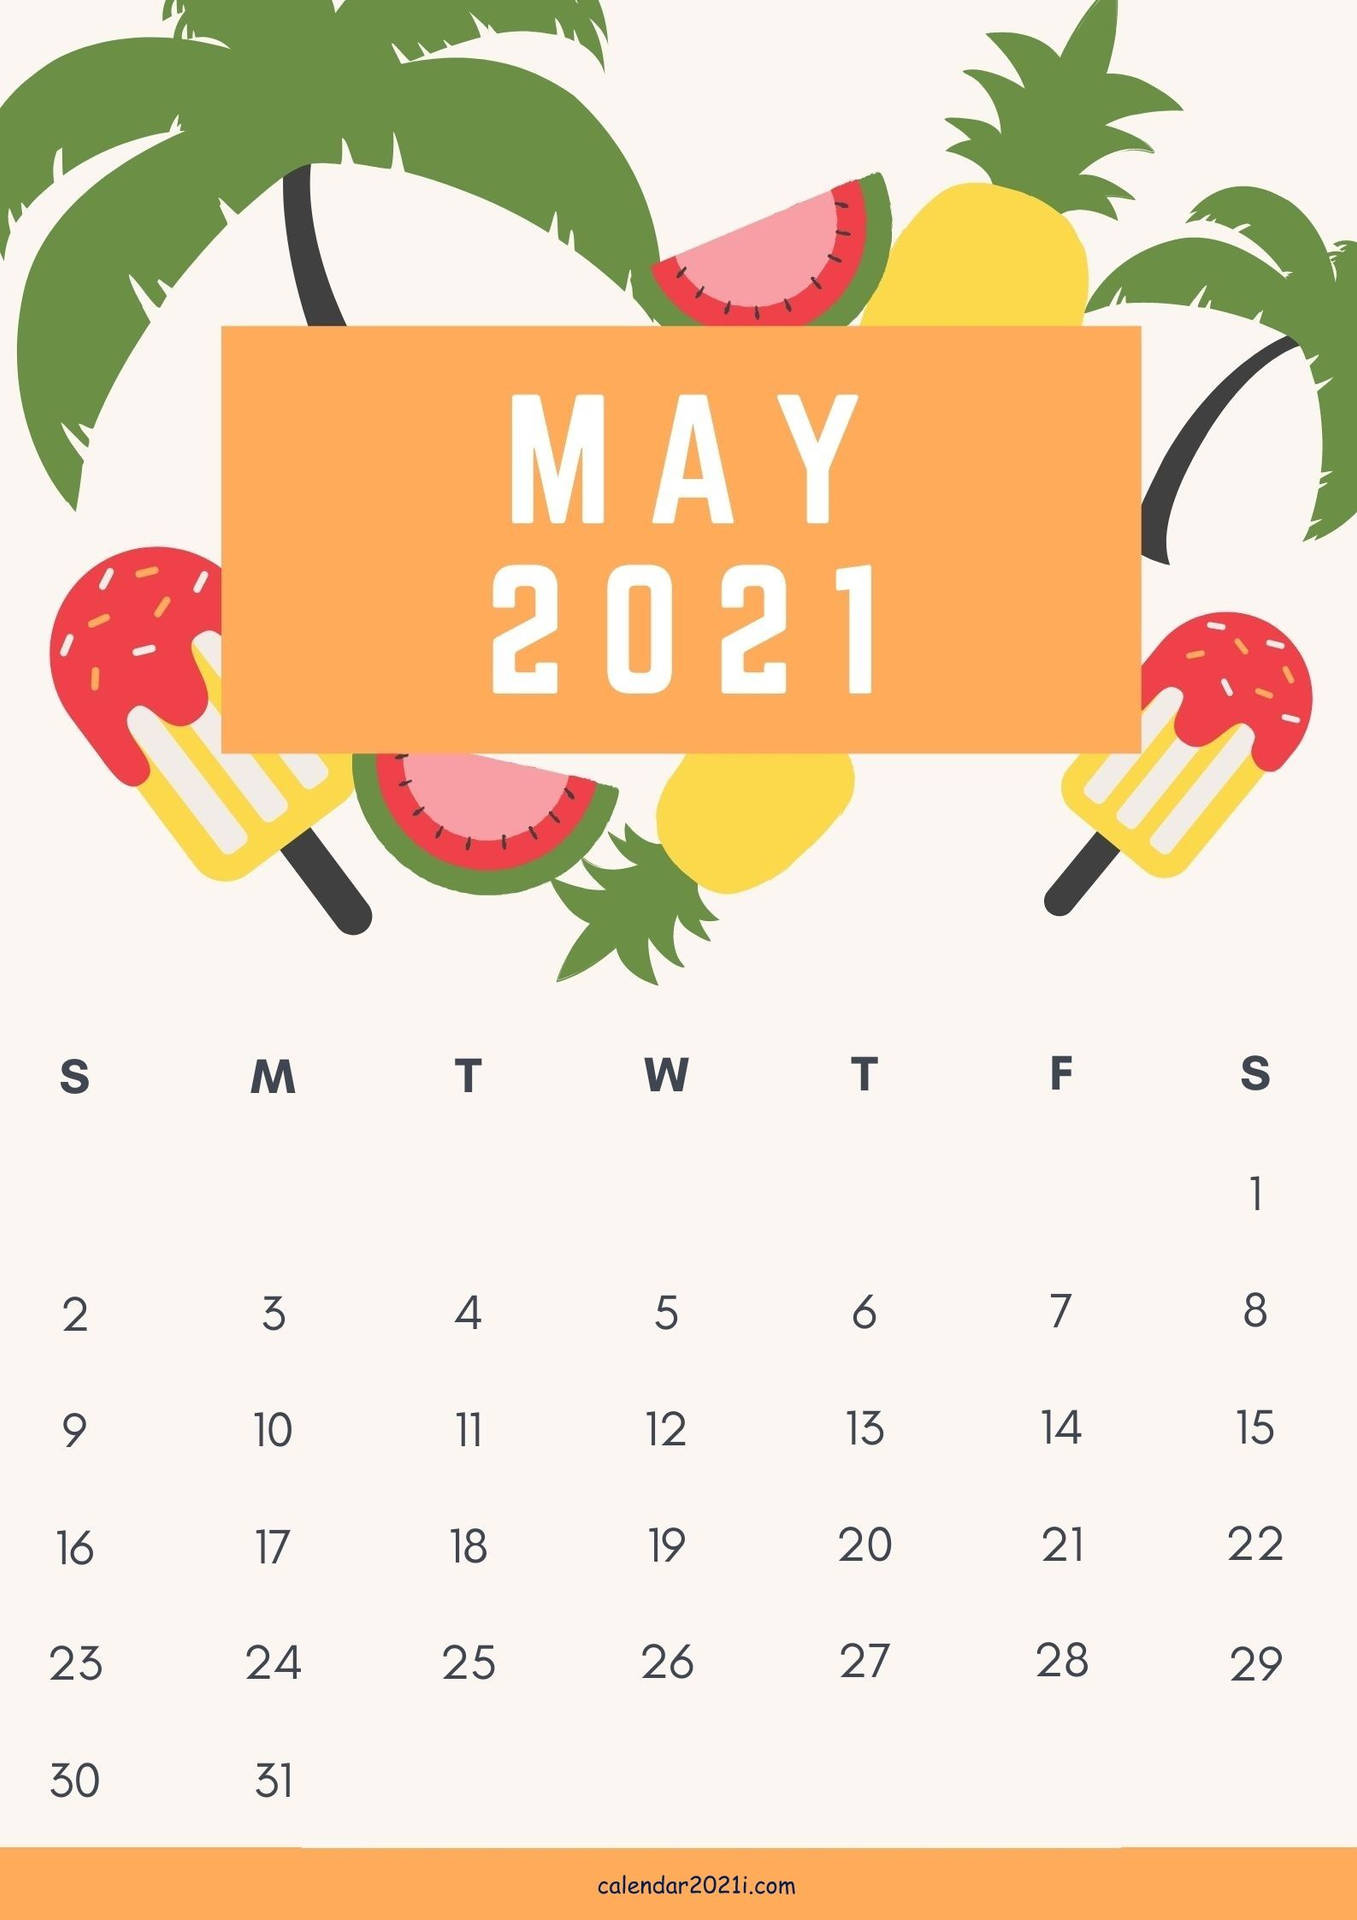 Tropical Popsicles May Calendar 2021